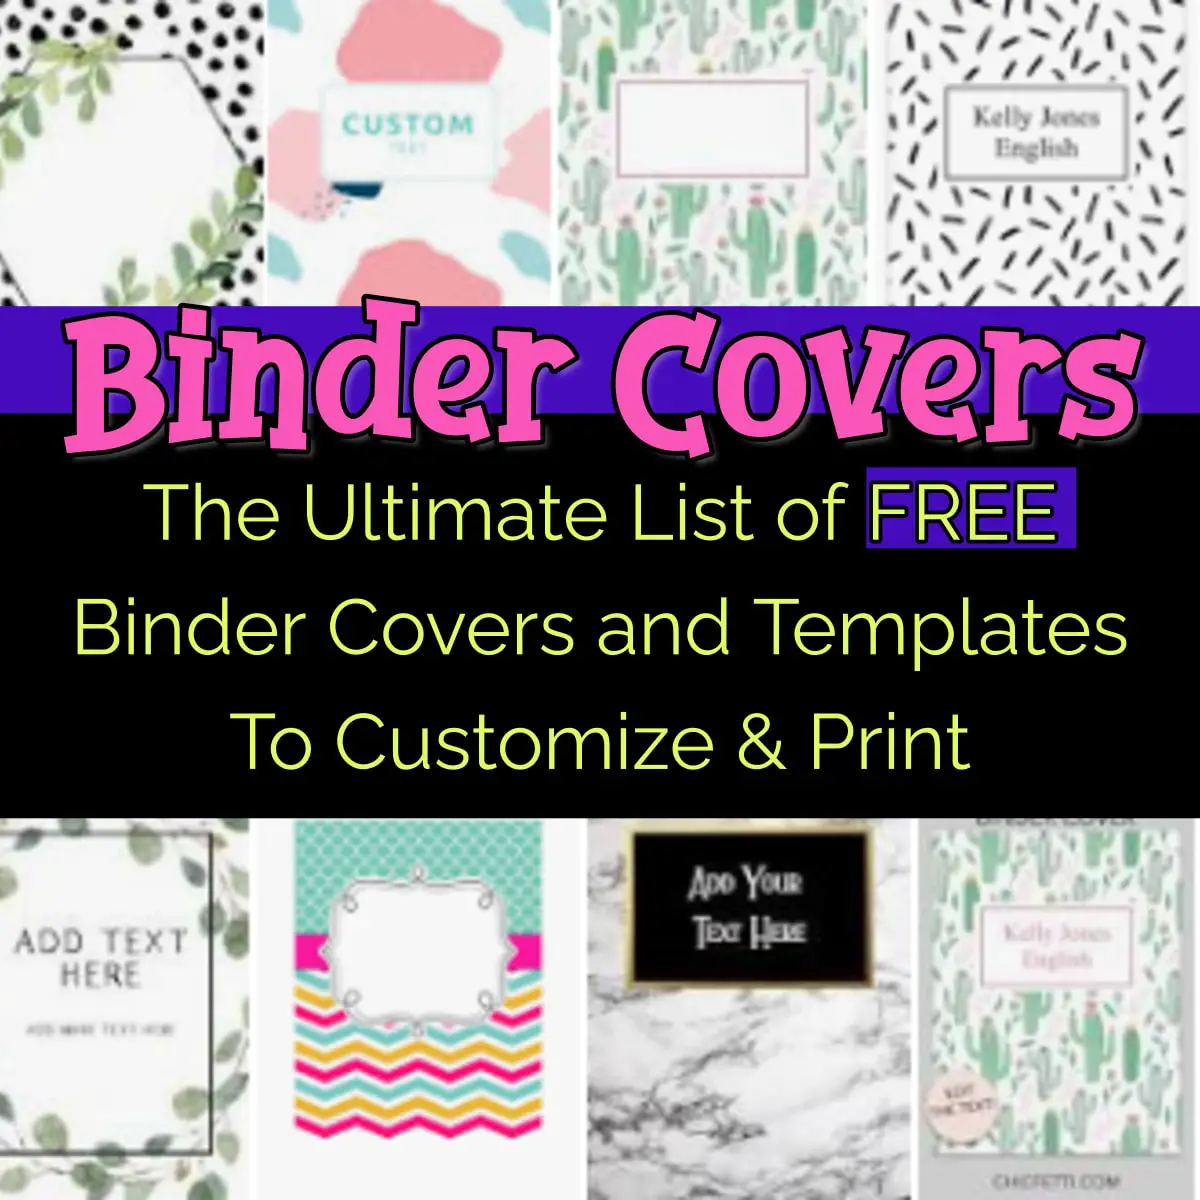 Binder Covers-Best FREE Templates, Printables & Ideas Regarding Business Binder Cover Templates